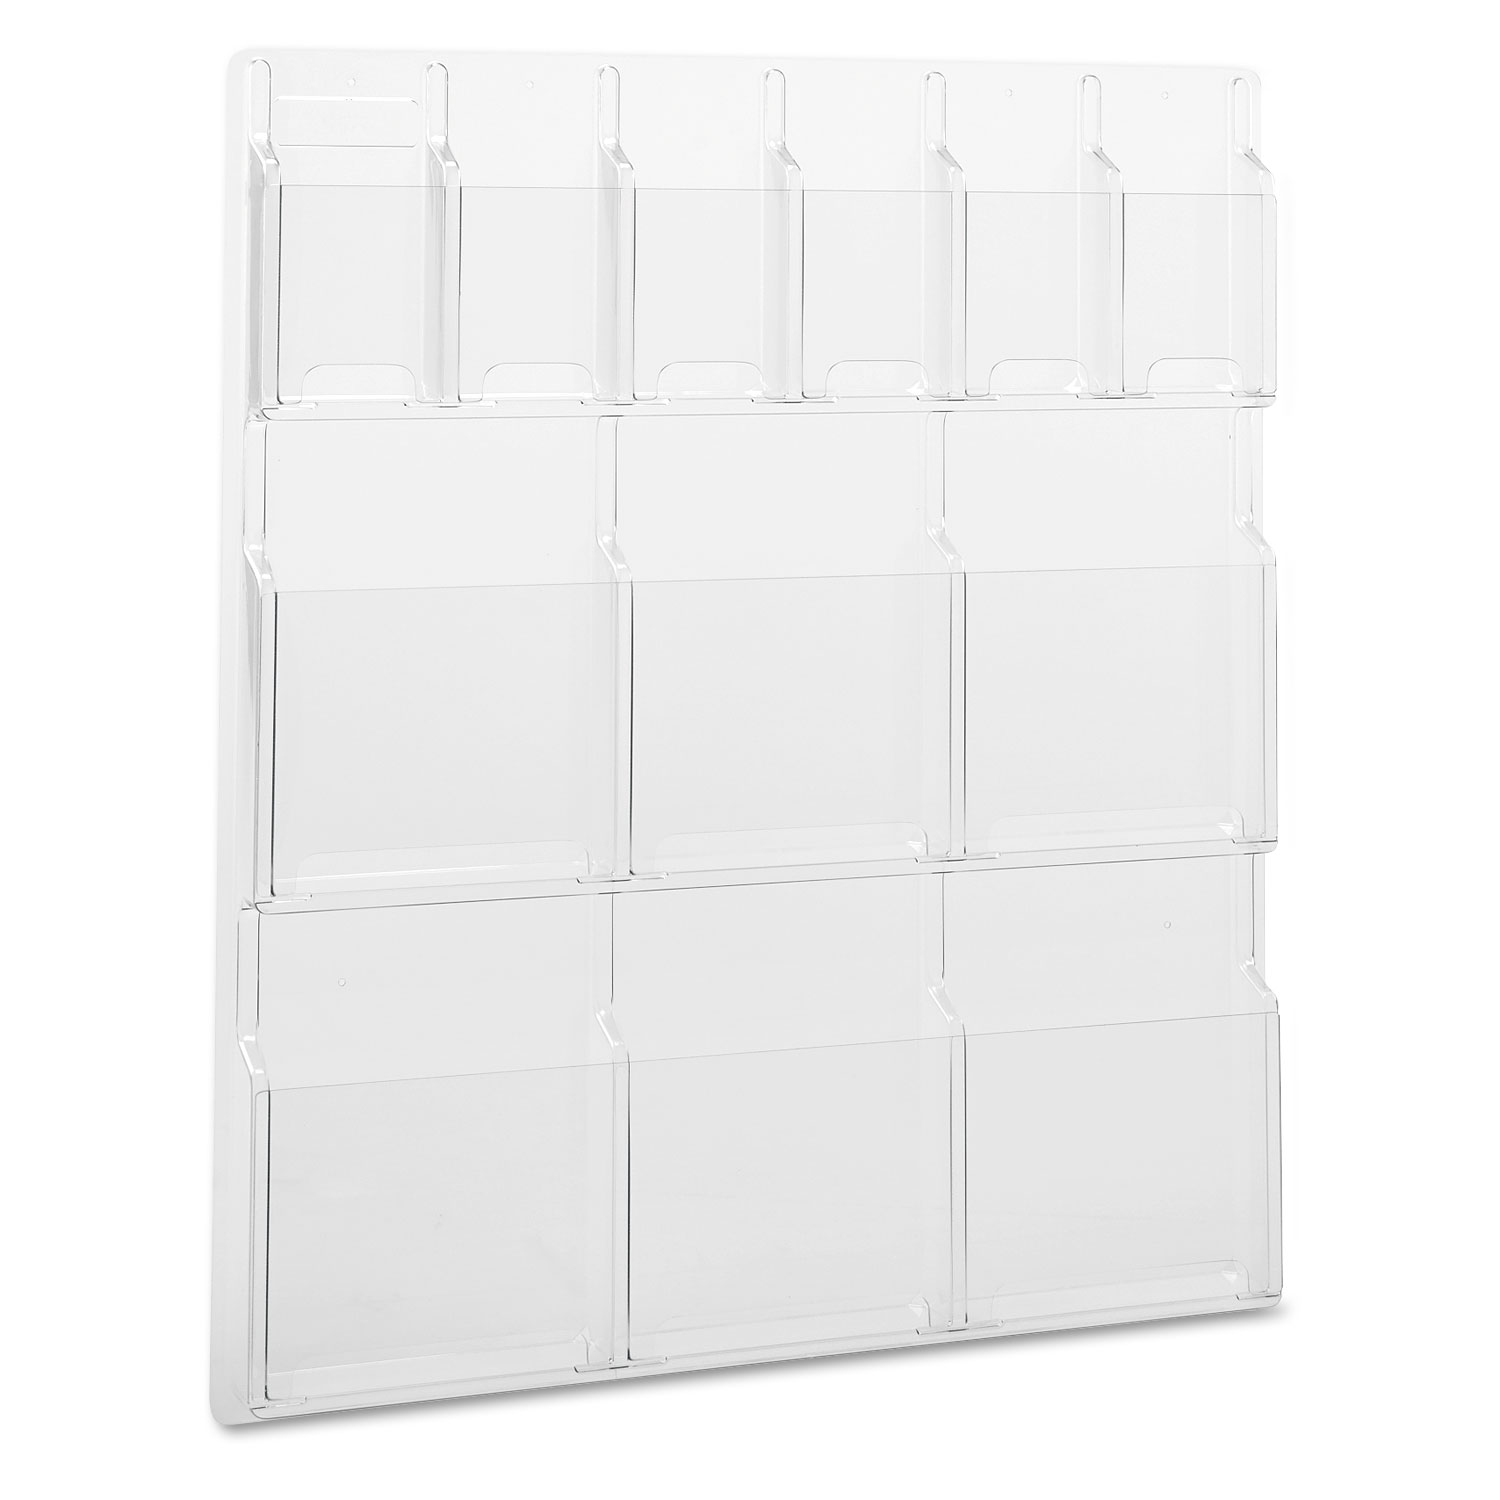  Safco 5606CL Reveal Clear Literature Displays, 12 Compartments, 30w x 2d x 34.75h, Clear (SAF5606CL) 